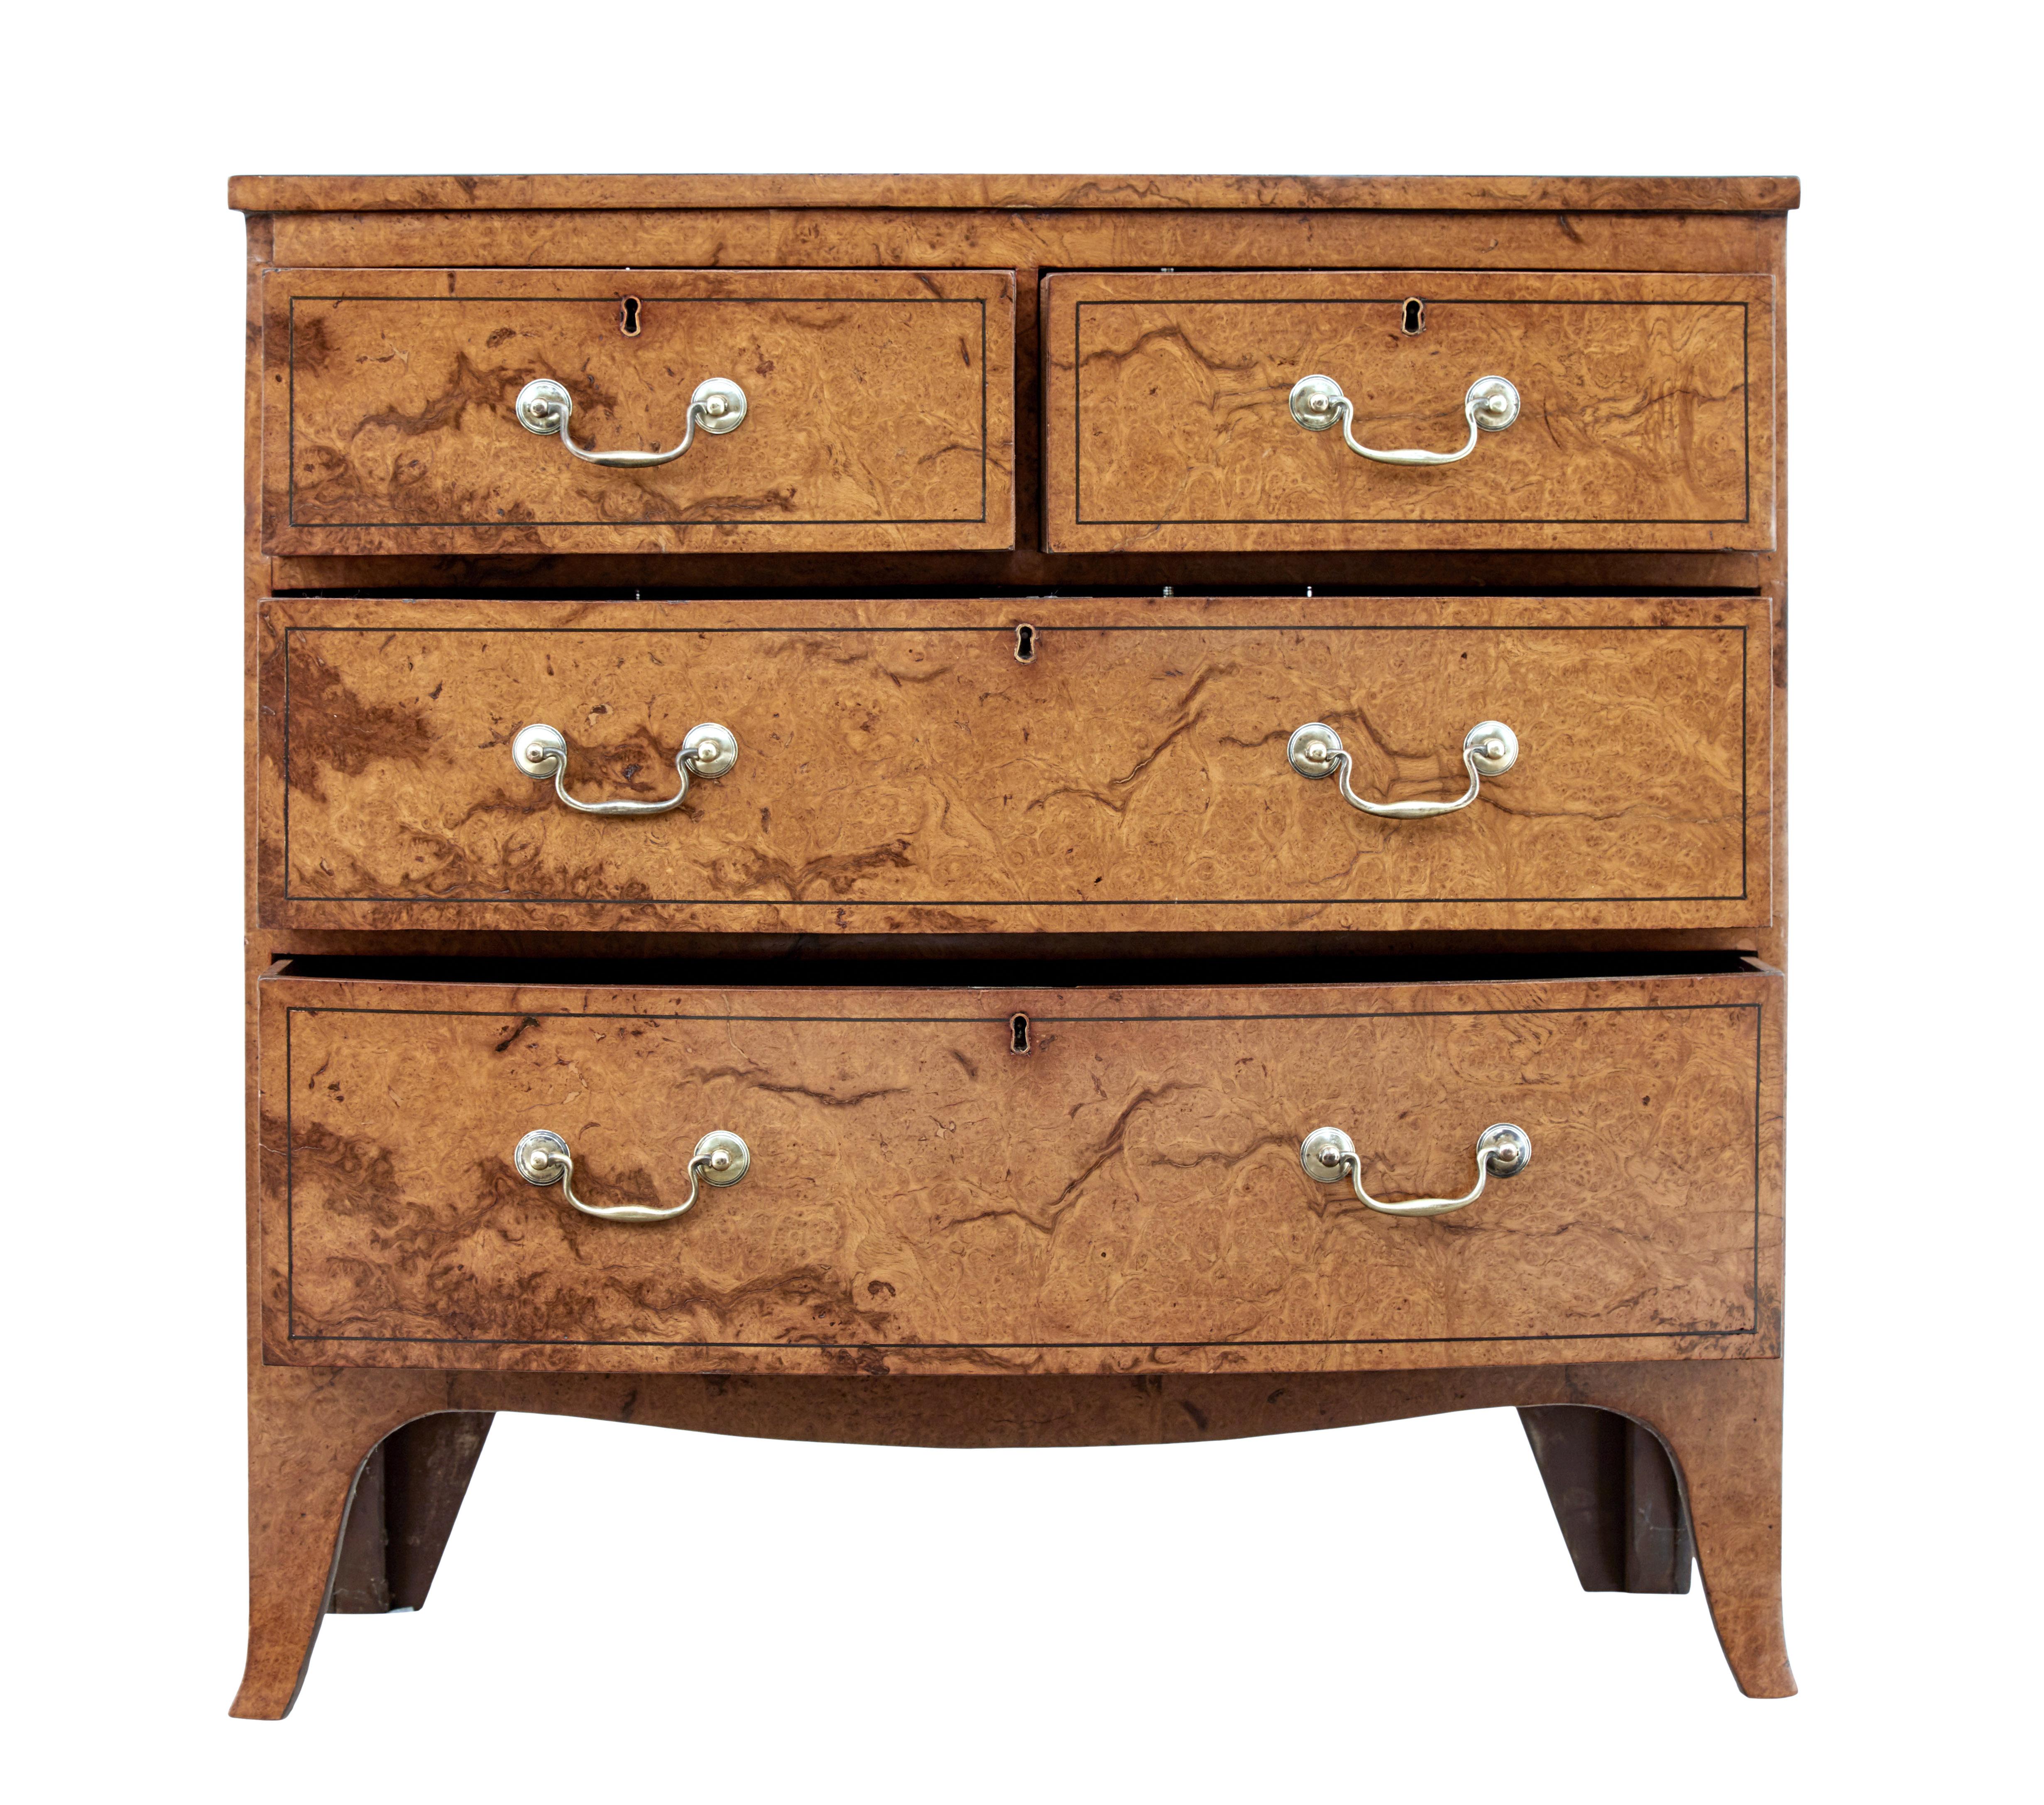 English Burr Walnut Bow Front Chest of Drawers circa 1870 with Bookmatch Veneer For Sale 2